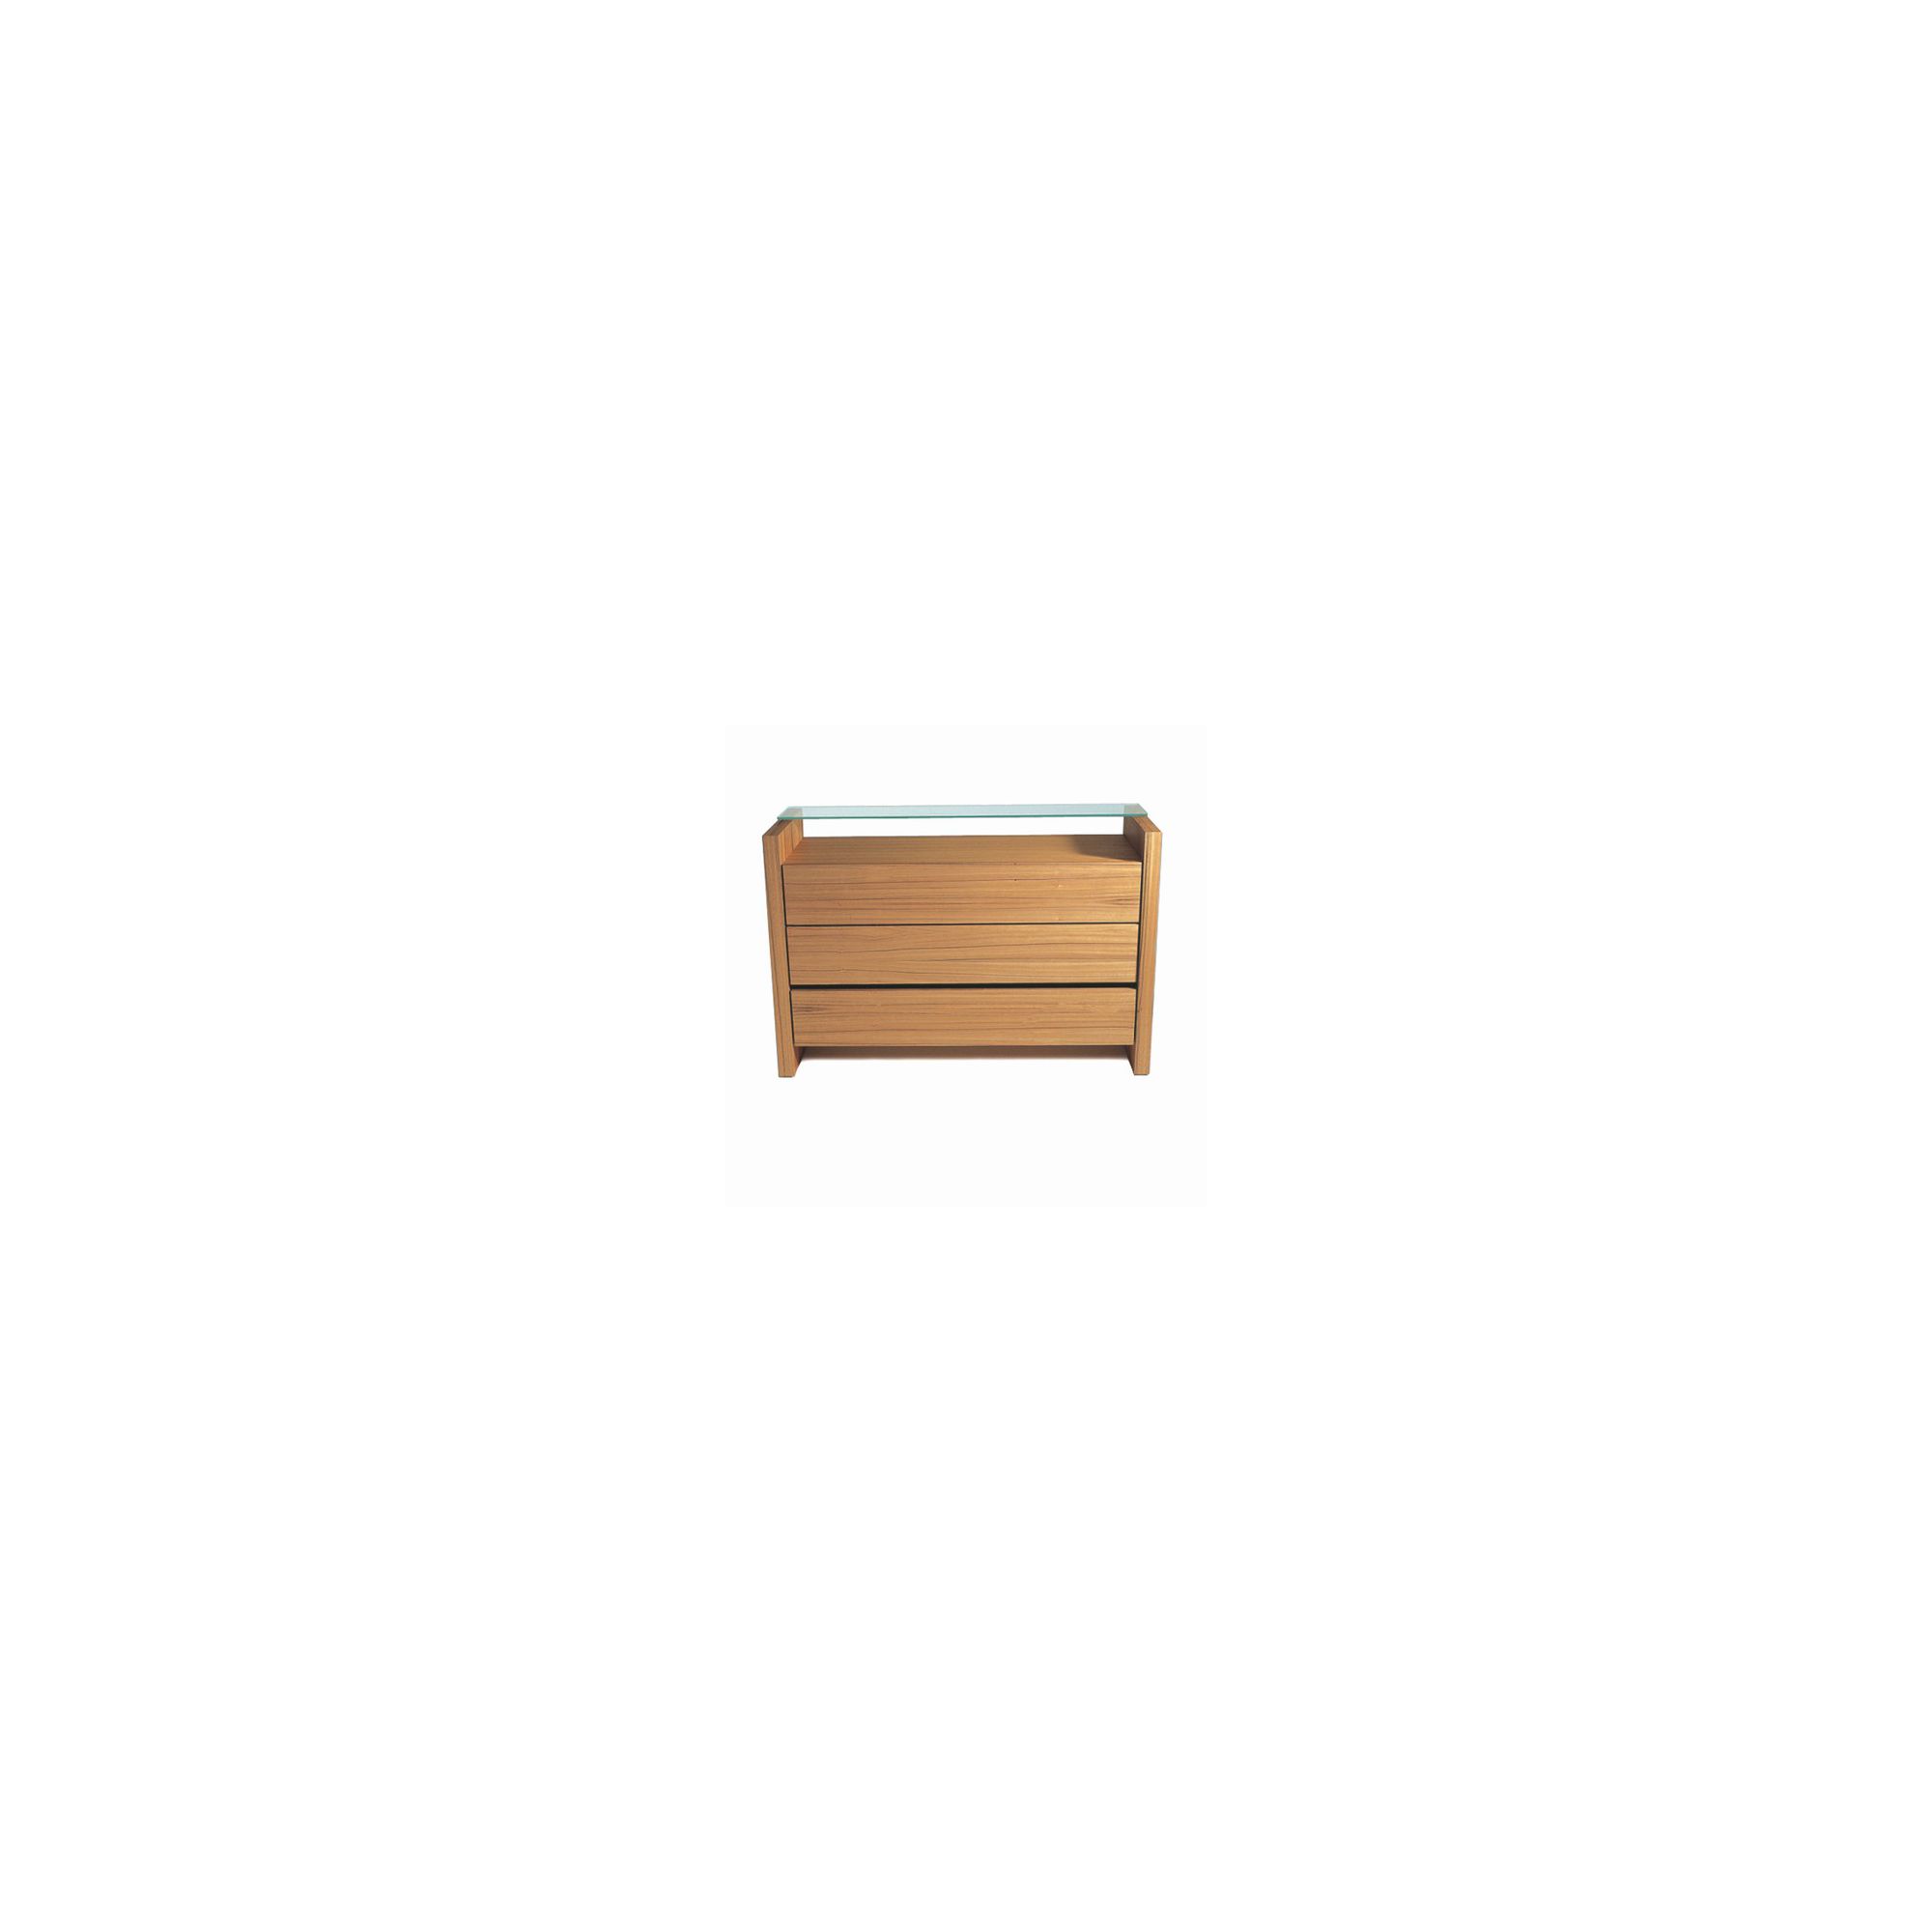 Gillmore Space Brompton Three Drawers Chest in Tigerwood at Tesco Direct